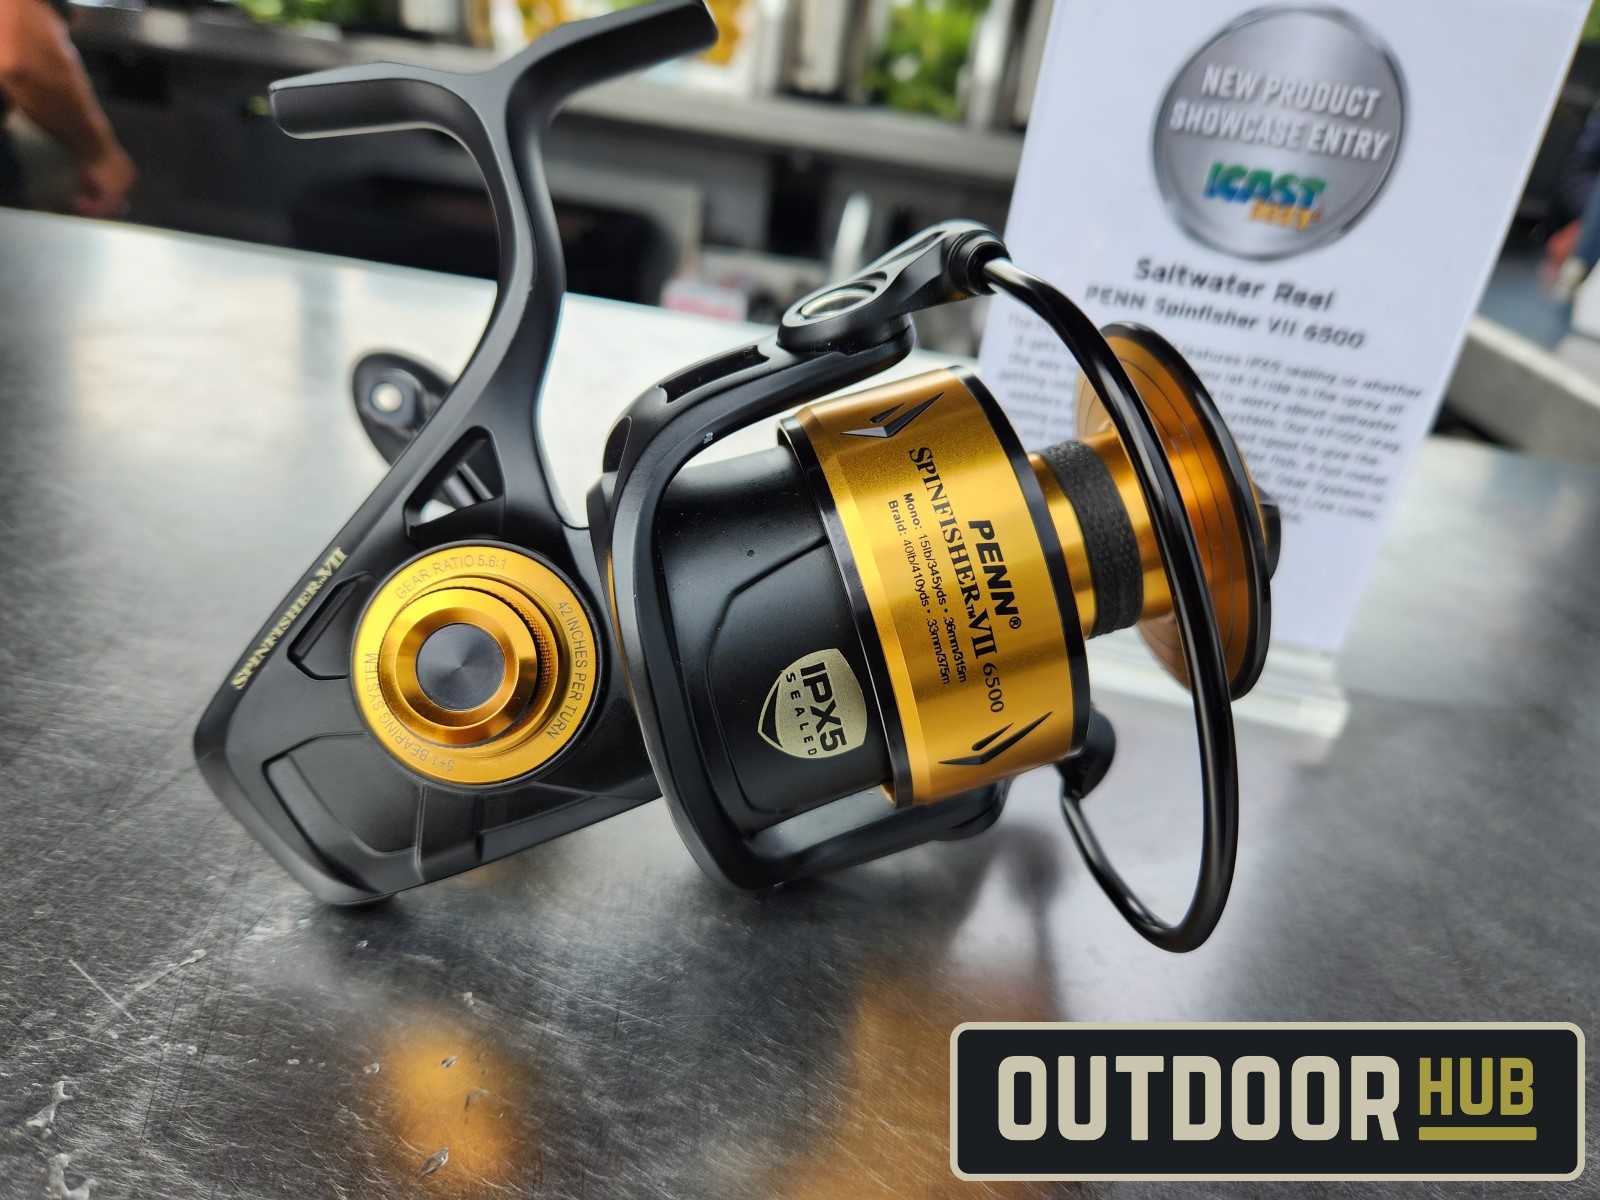 [ICAST 2023] The Spinfisher VII - The Next Gen of Spinfisher from PENN